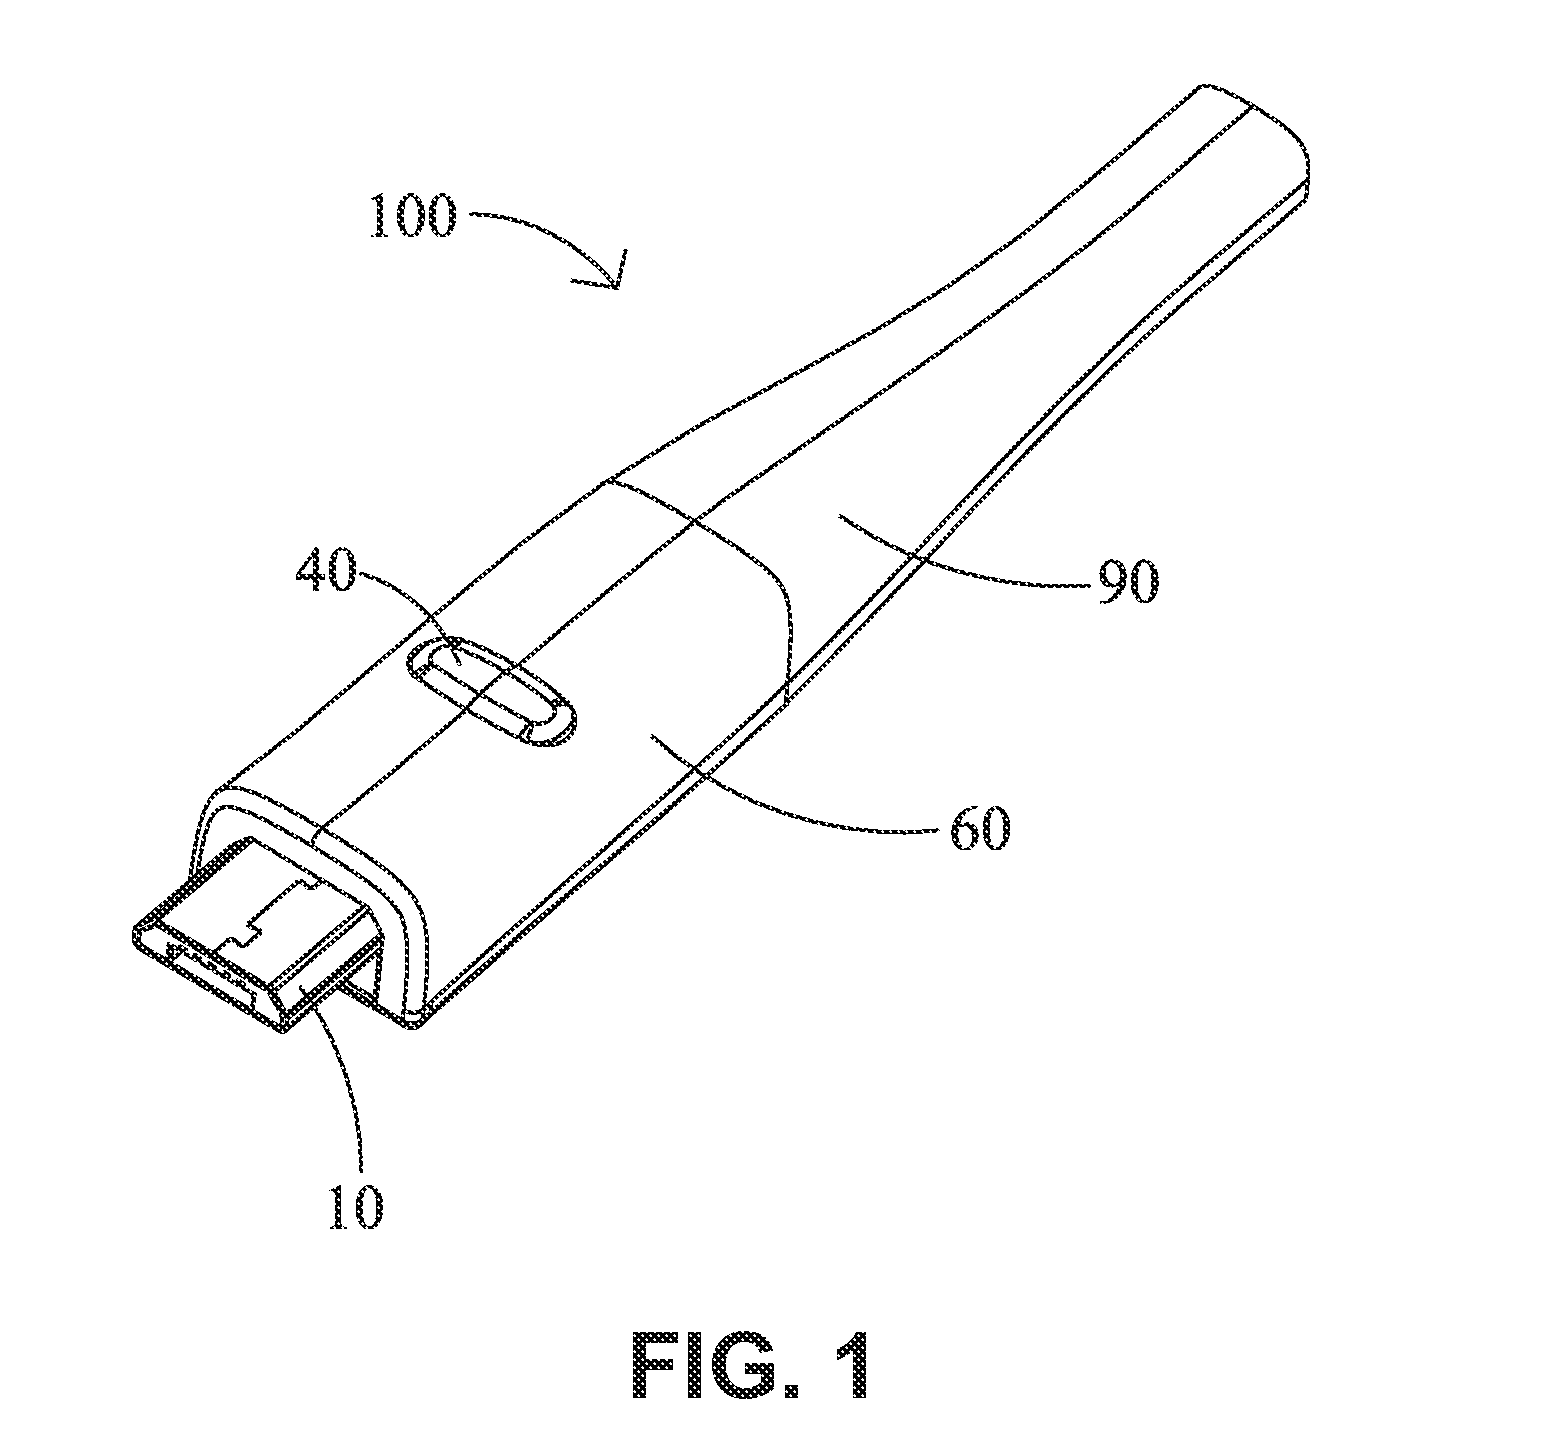 Electrical connector assembly with a light guide member